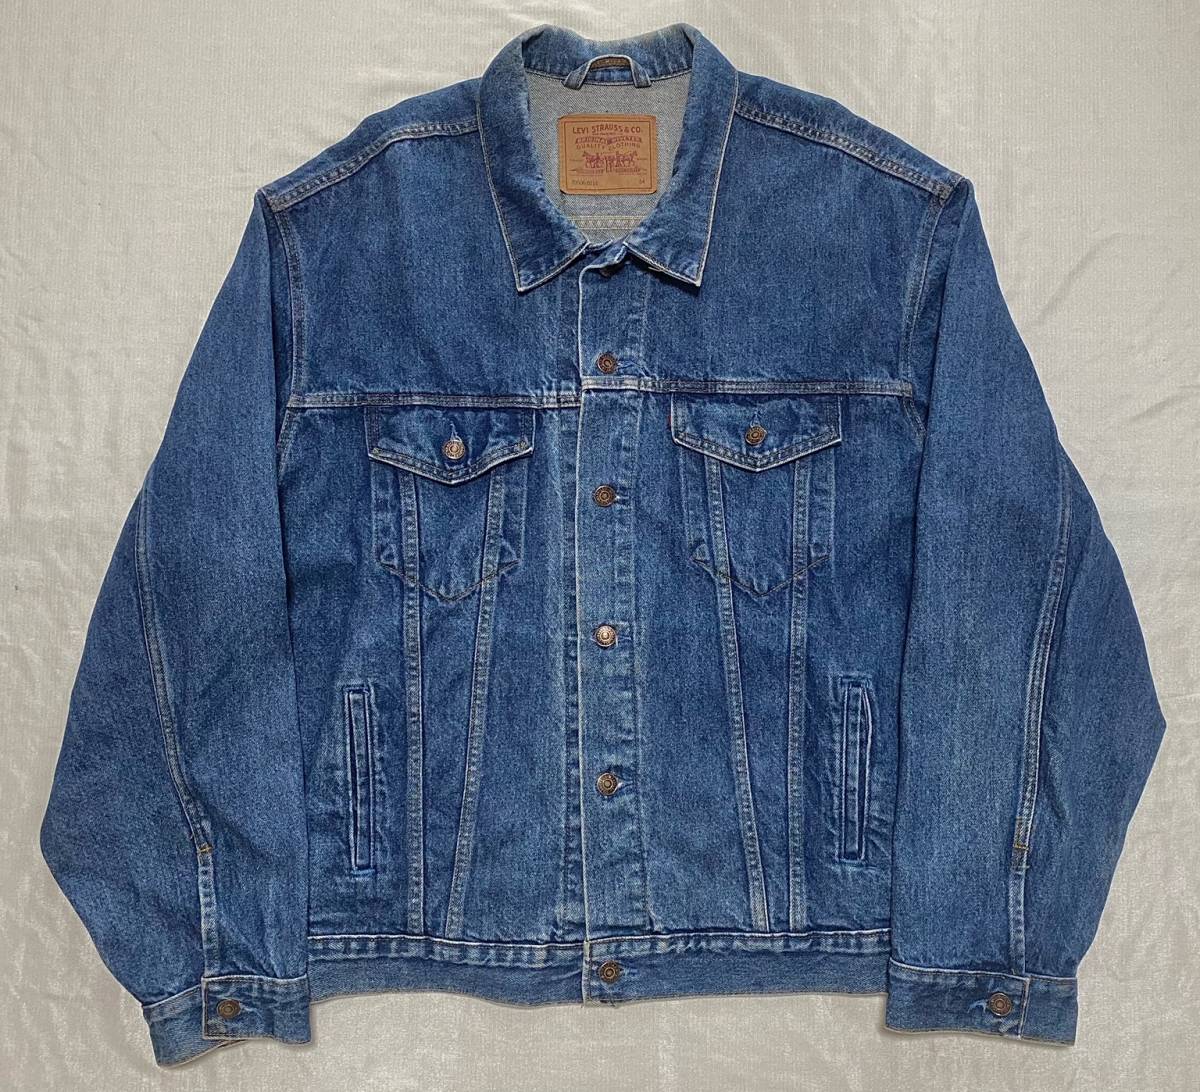 90s～ Levi's リーバイス 70506 -0216　size 54　MADE IN USA アメリカ製　デニム ジャケット